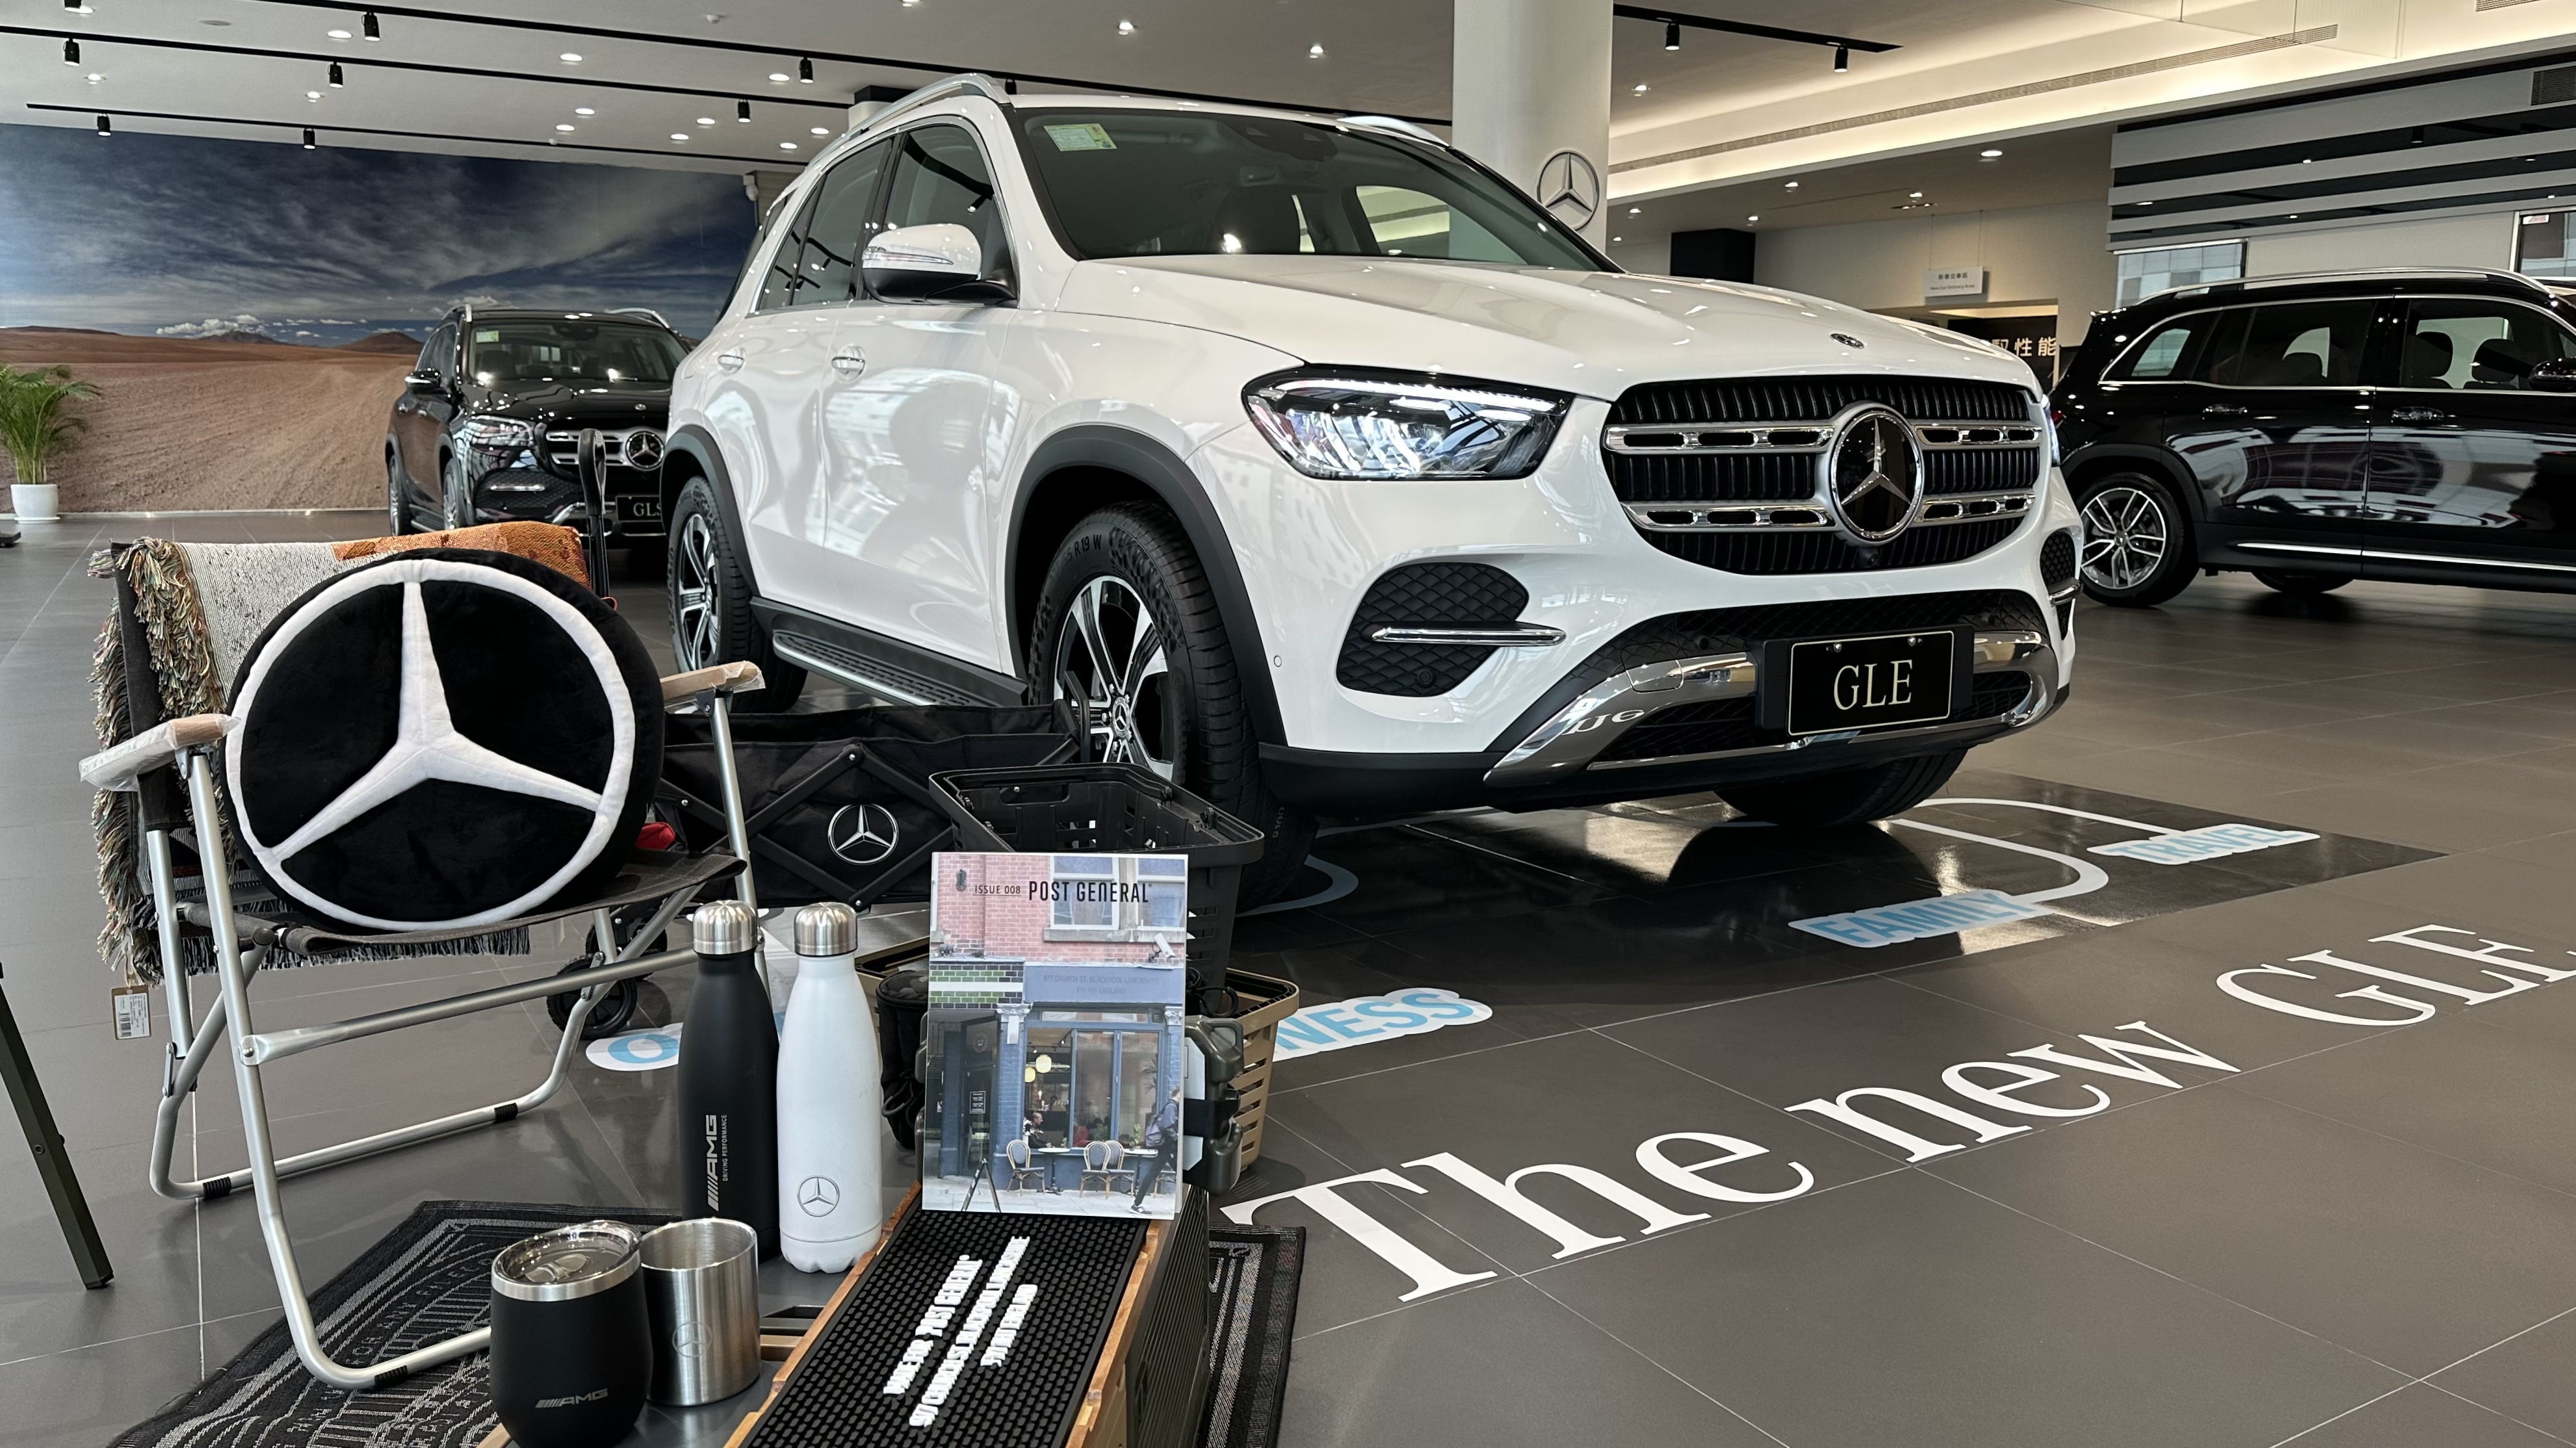 THE NEW GLE. 家族 in 賓航